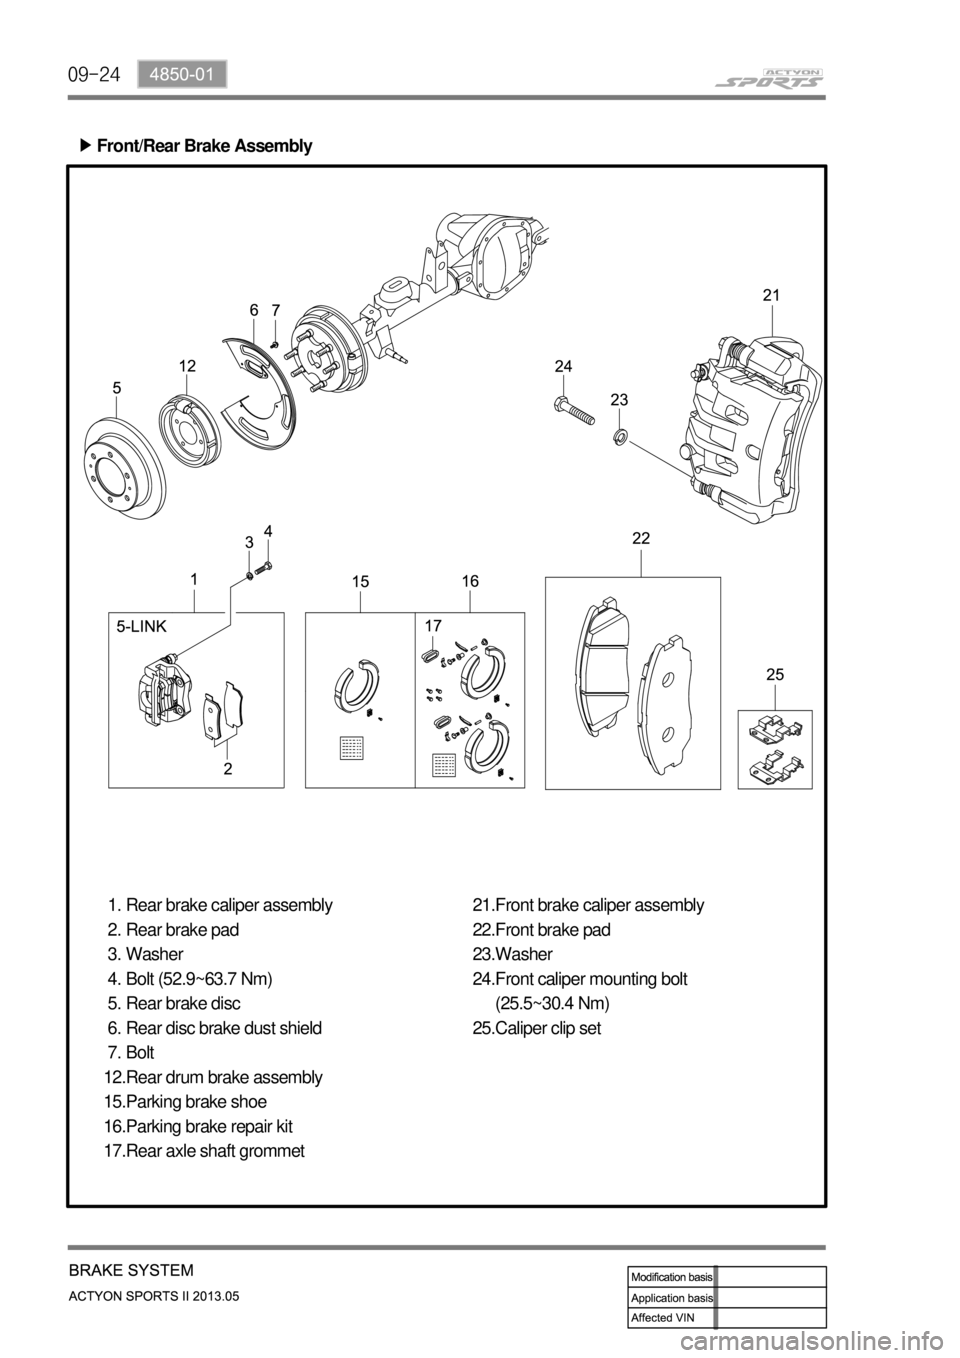 SSANGYONG NEW ACTYON SPORTS 2013 User Guide 09-24
Front/Rear Brake Assembly ▶
Front brake caliper assembly
Front brake pad
Washer
Front caliper mounting bolt 
(25.5~30.4 Nm)
Caliper clip set 21.
22.
23.
24.
25. Rear brake caliper assembly
Rea